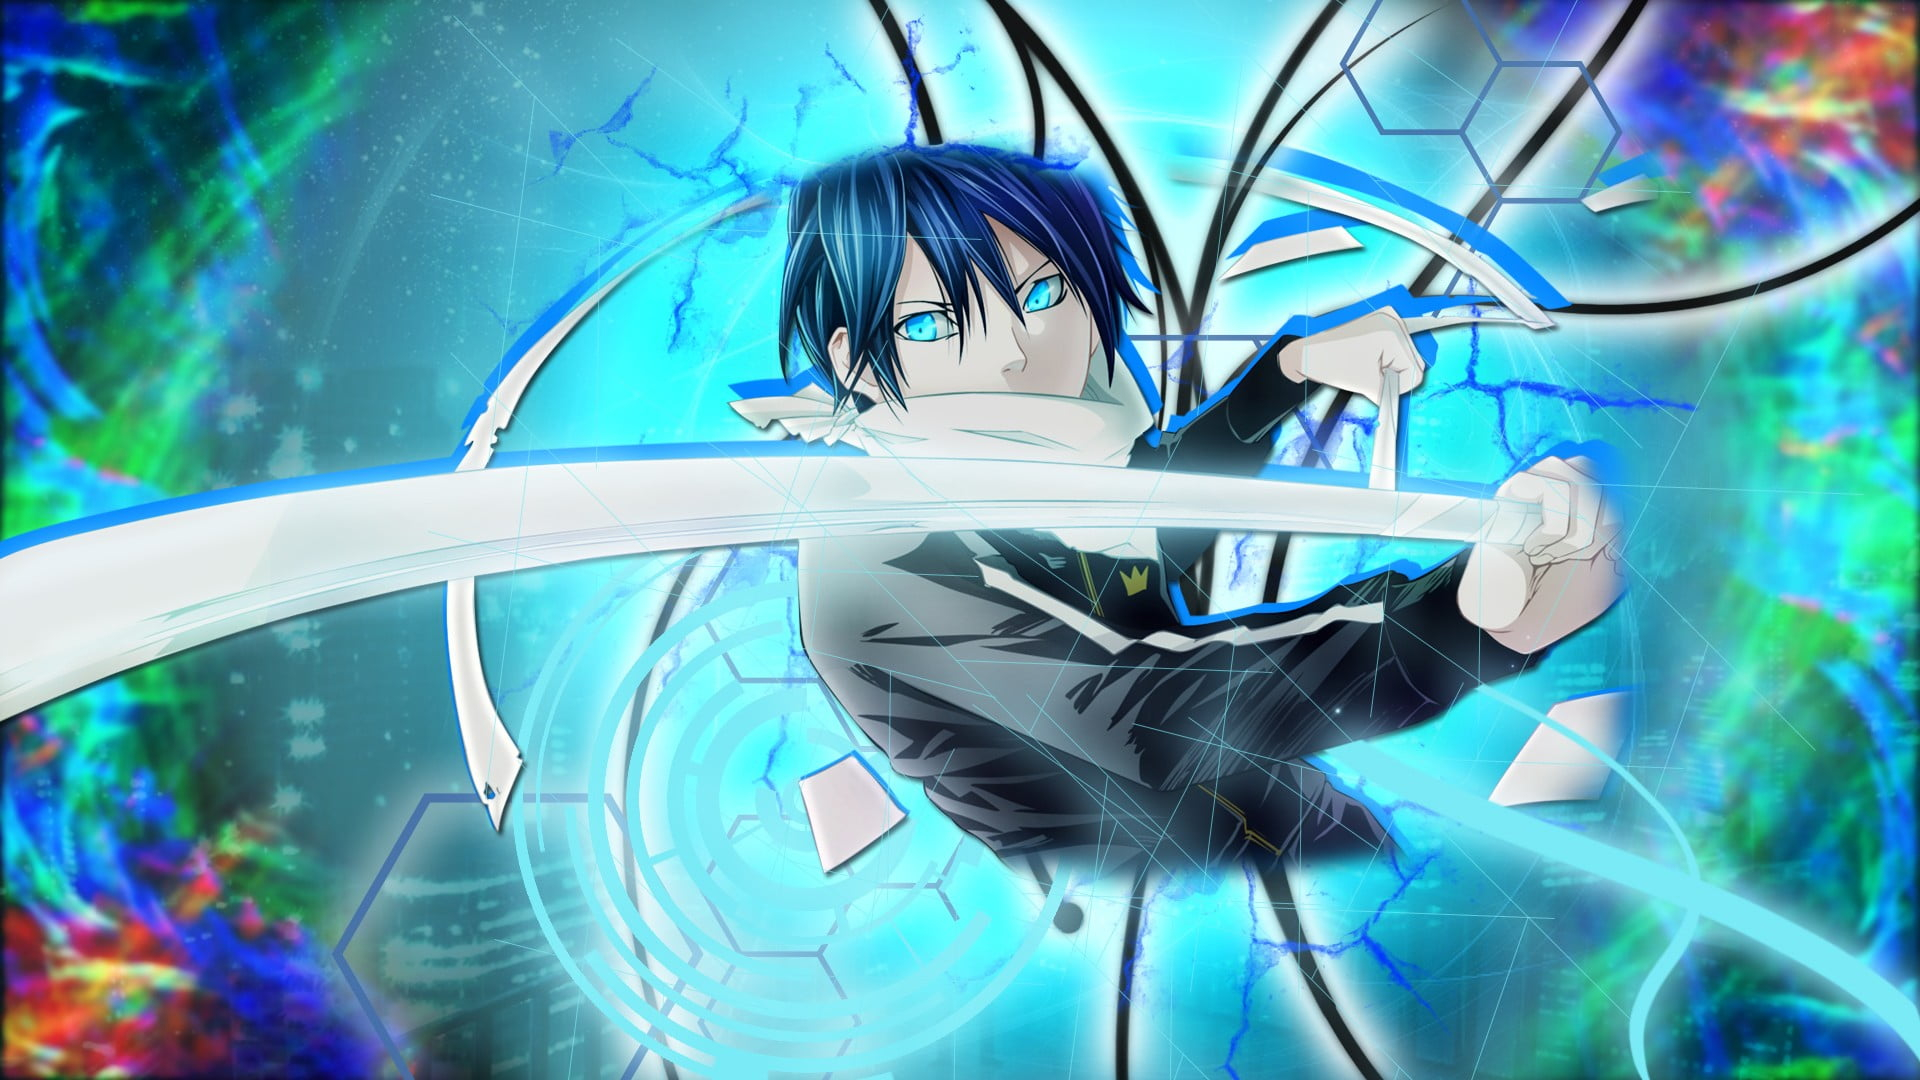 1920x1080 Blue haired anime character digital wallpaper, Noragami HD wallpaper |